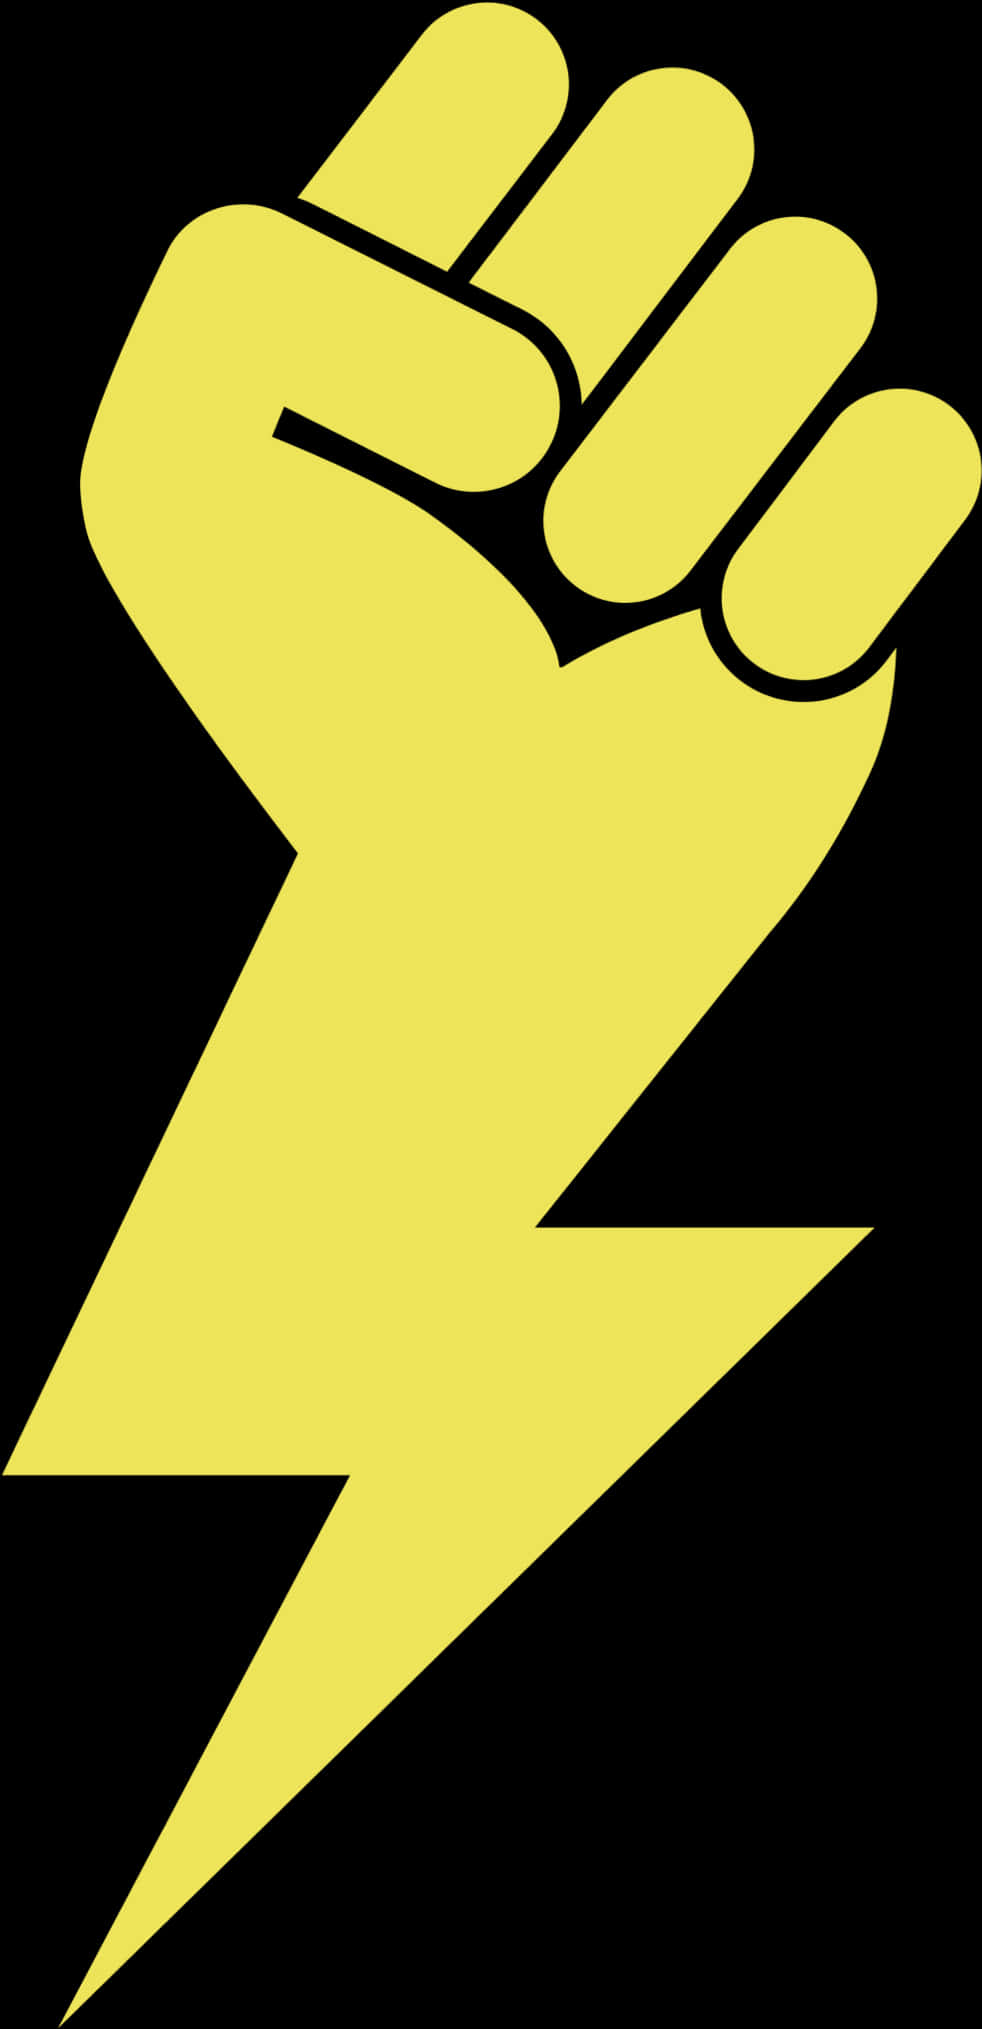 A Yellow Lightning Bolt With Black Background